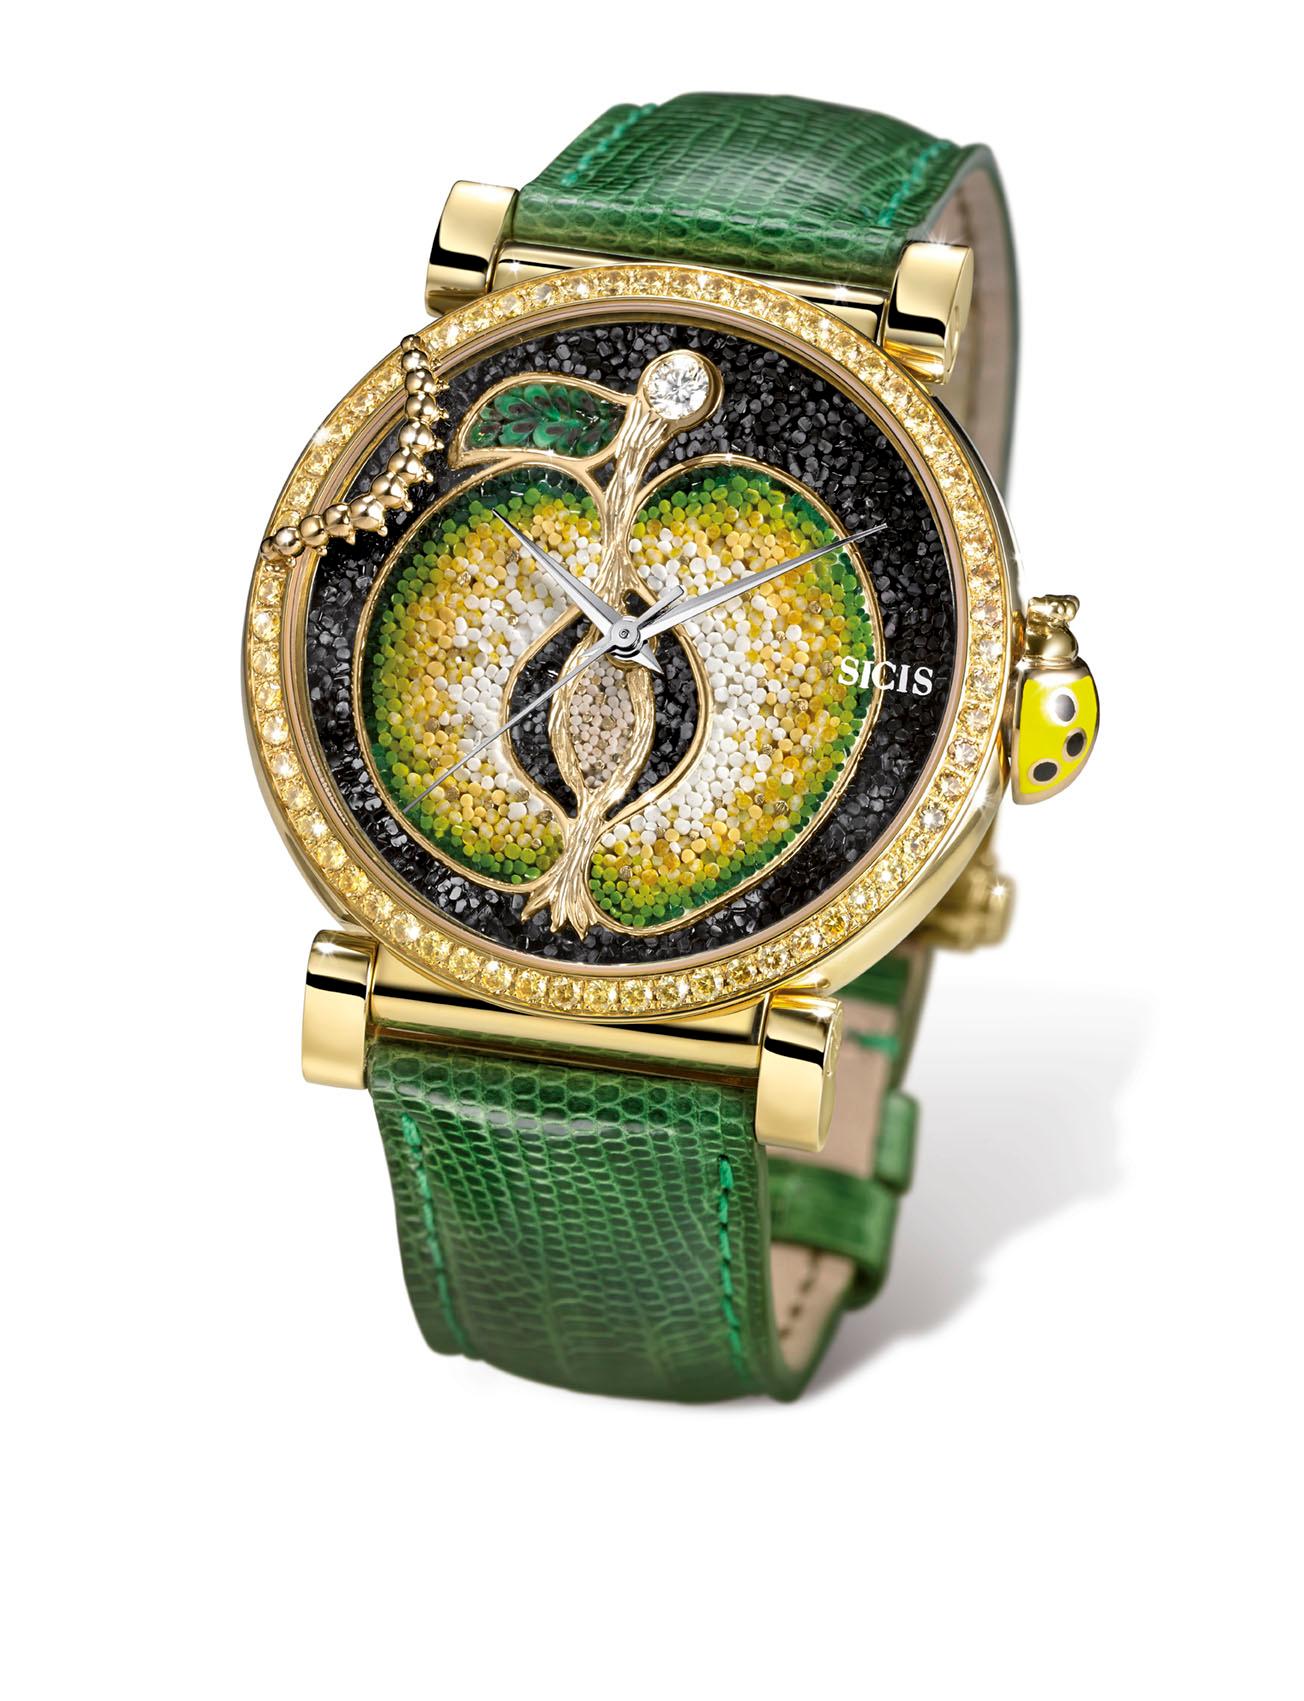 Brilliant Cut Watch Yellow Gold White Diamond Sapphires Lizard Strap Handdecorated Micromosaic For Sale